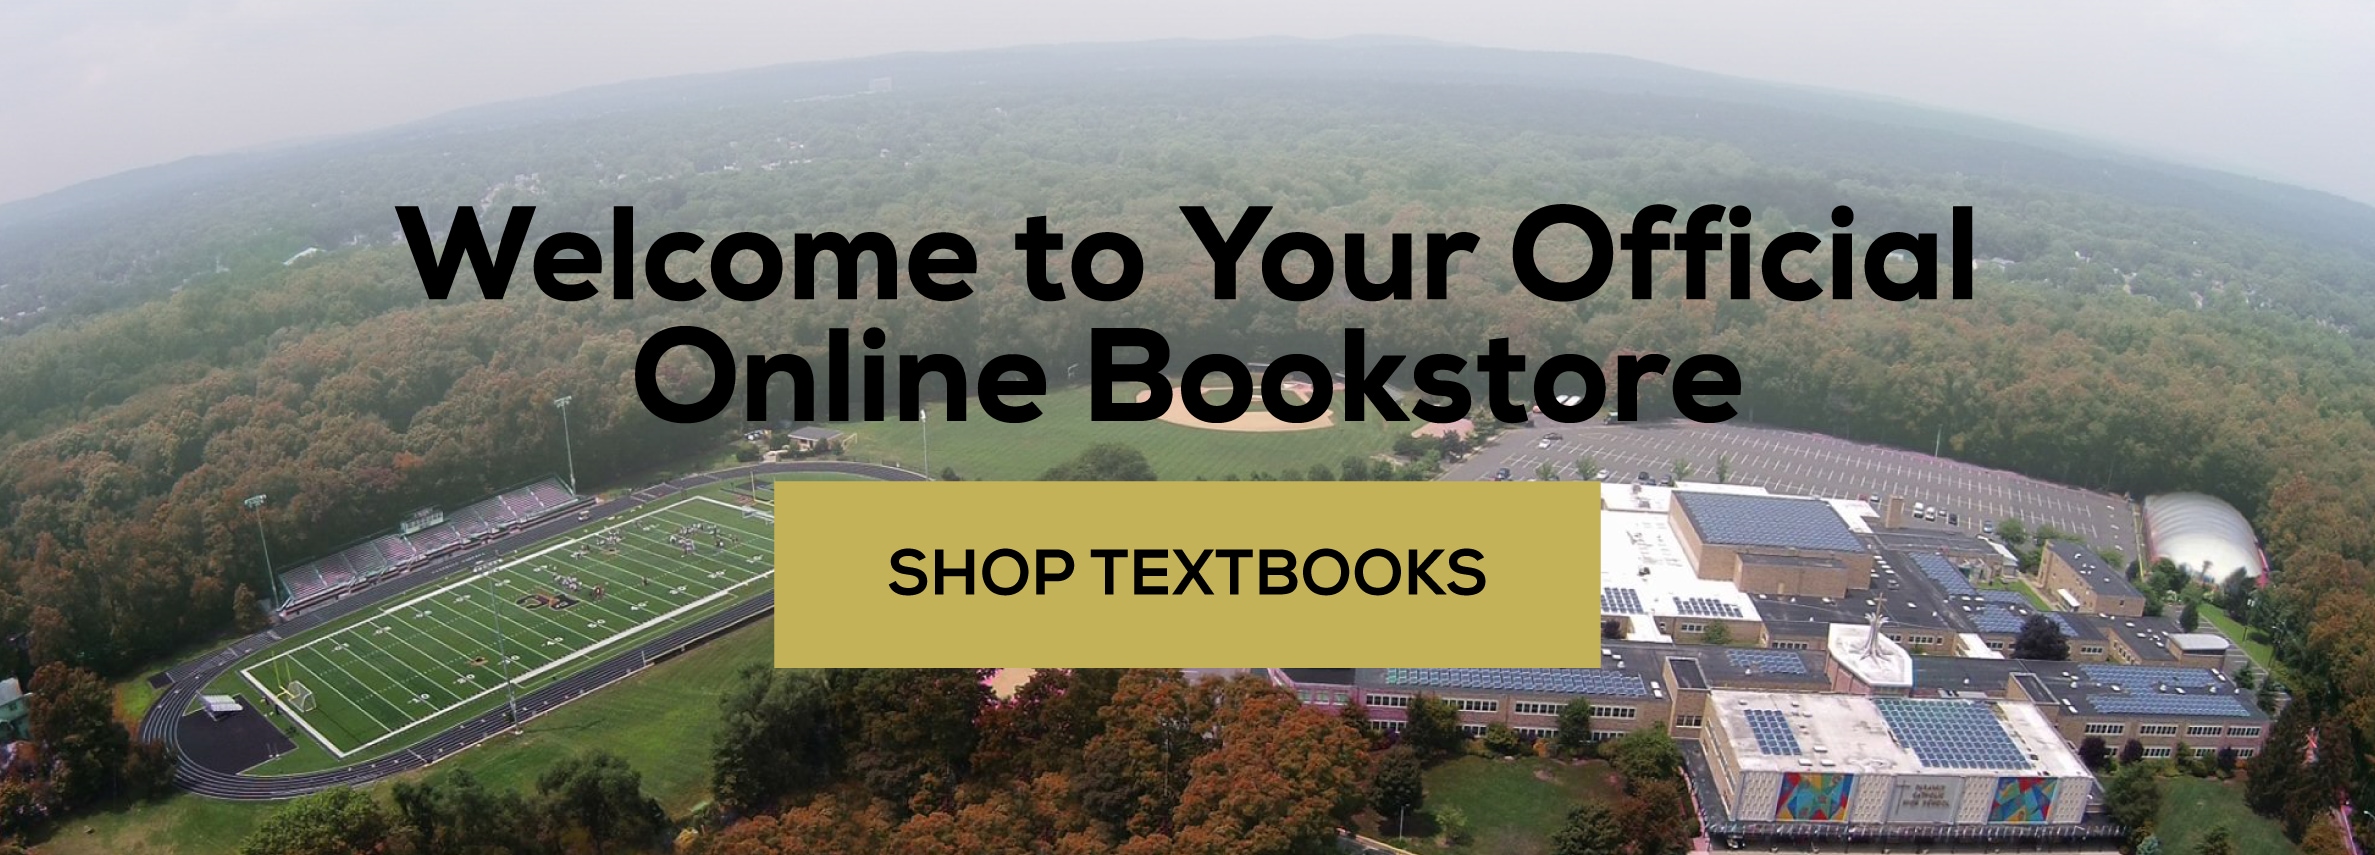 Welcome to your official online bookstore! Shop textbooks.